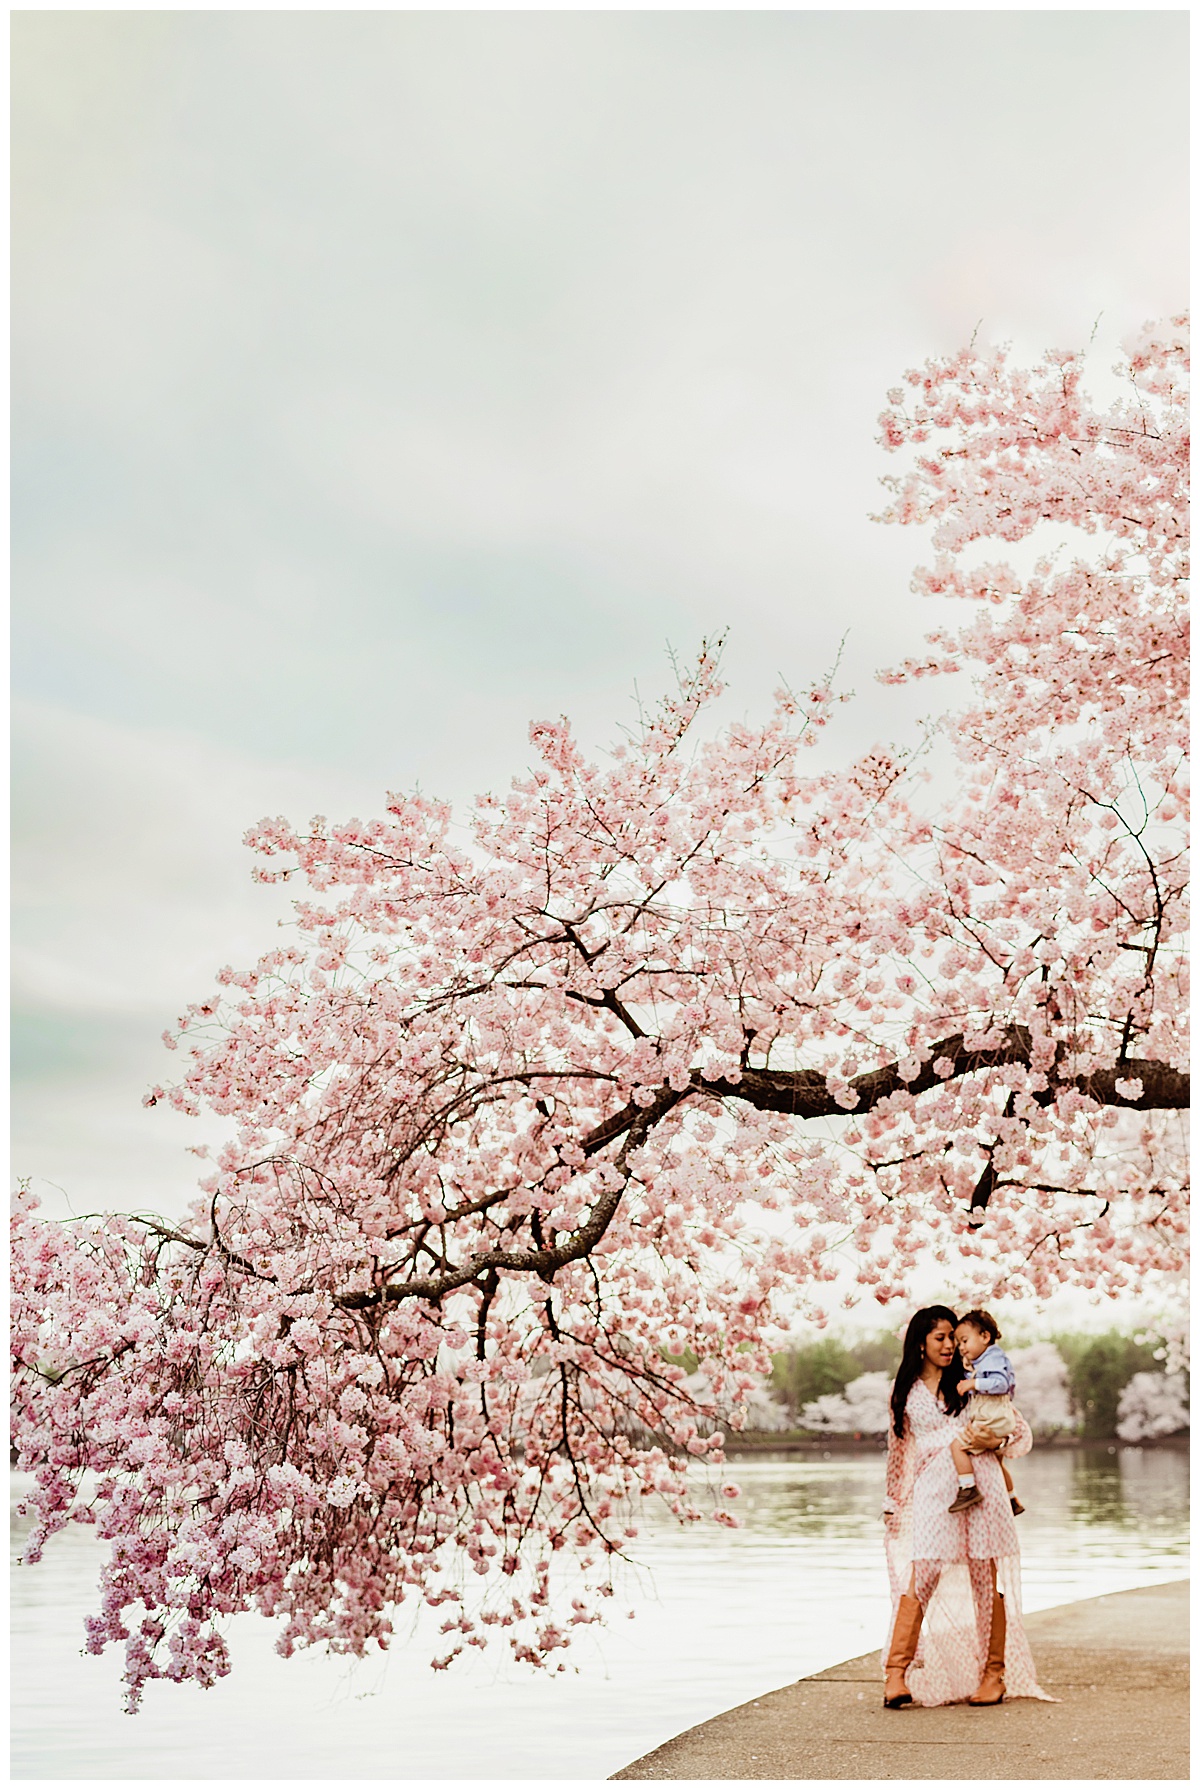 Family stands under a blooming tree during Washington, DC, Cherry Blossom photos